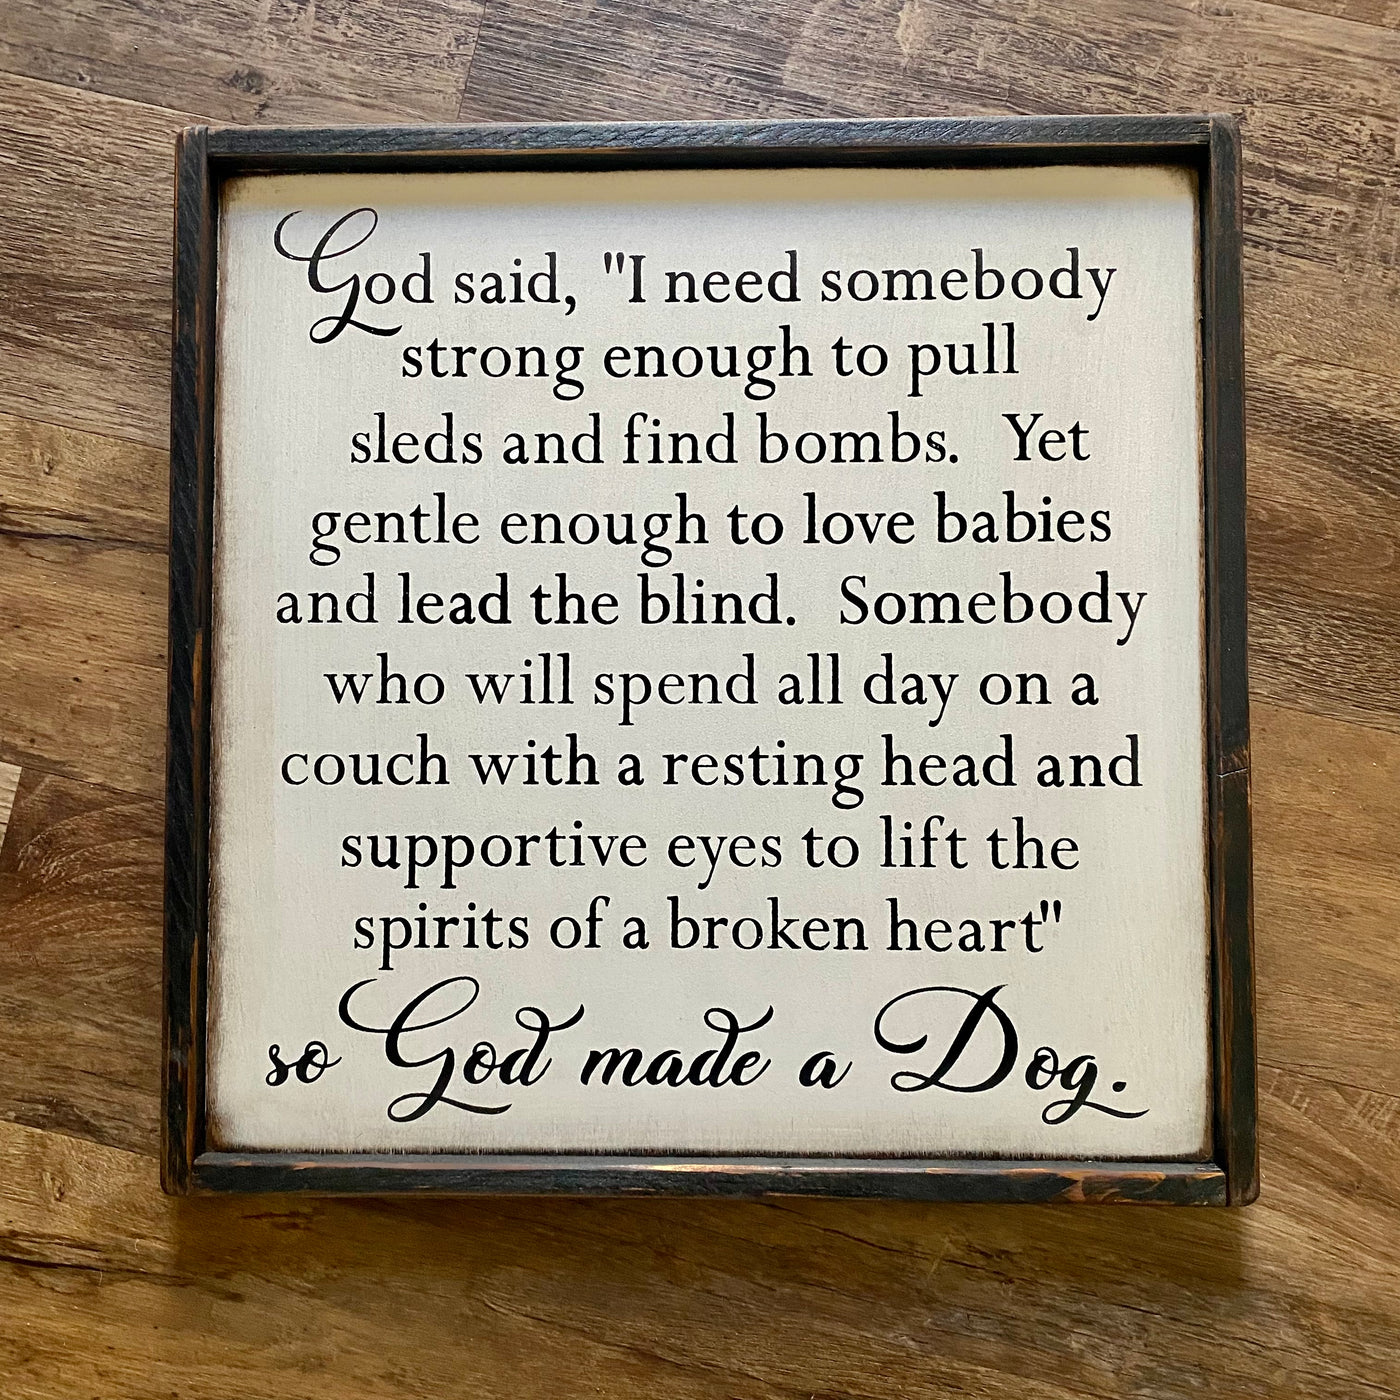 handmade wood sign reads God said, I need somebody strong enough to pull sleds and find bombs. Yet gentle enough to love babies and lead the blind. Somebody who will spend all day on a couch with a resting head and supportive eyes to lift the spirits of a broken heart so God made a Dog.